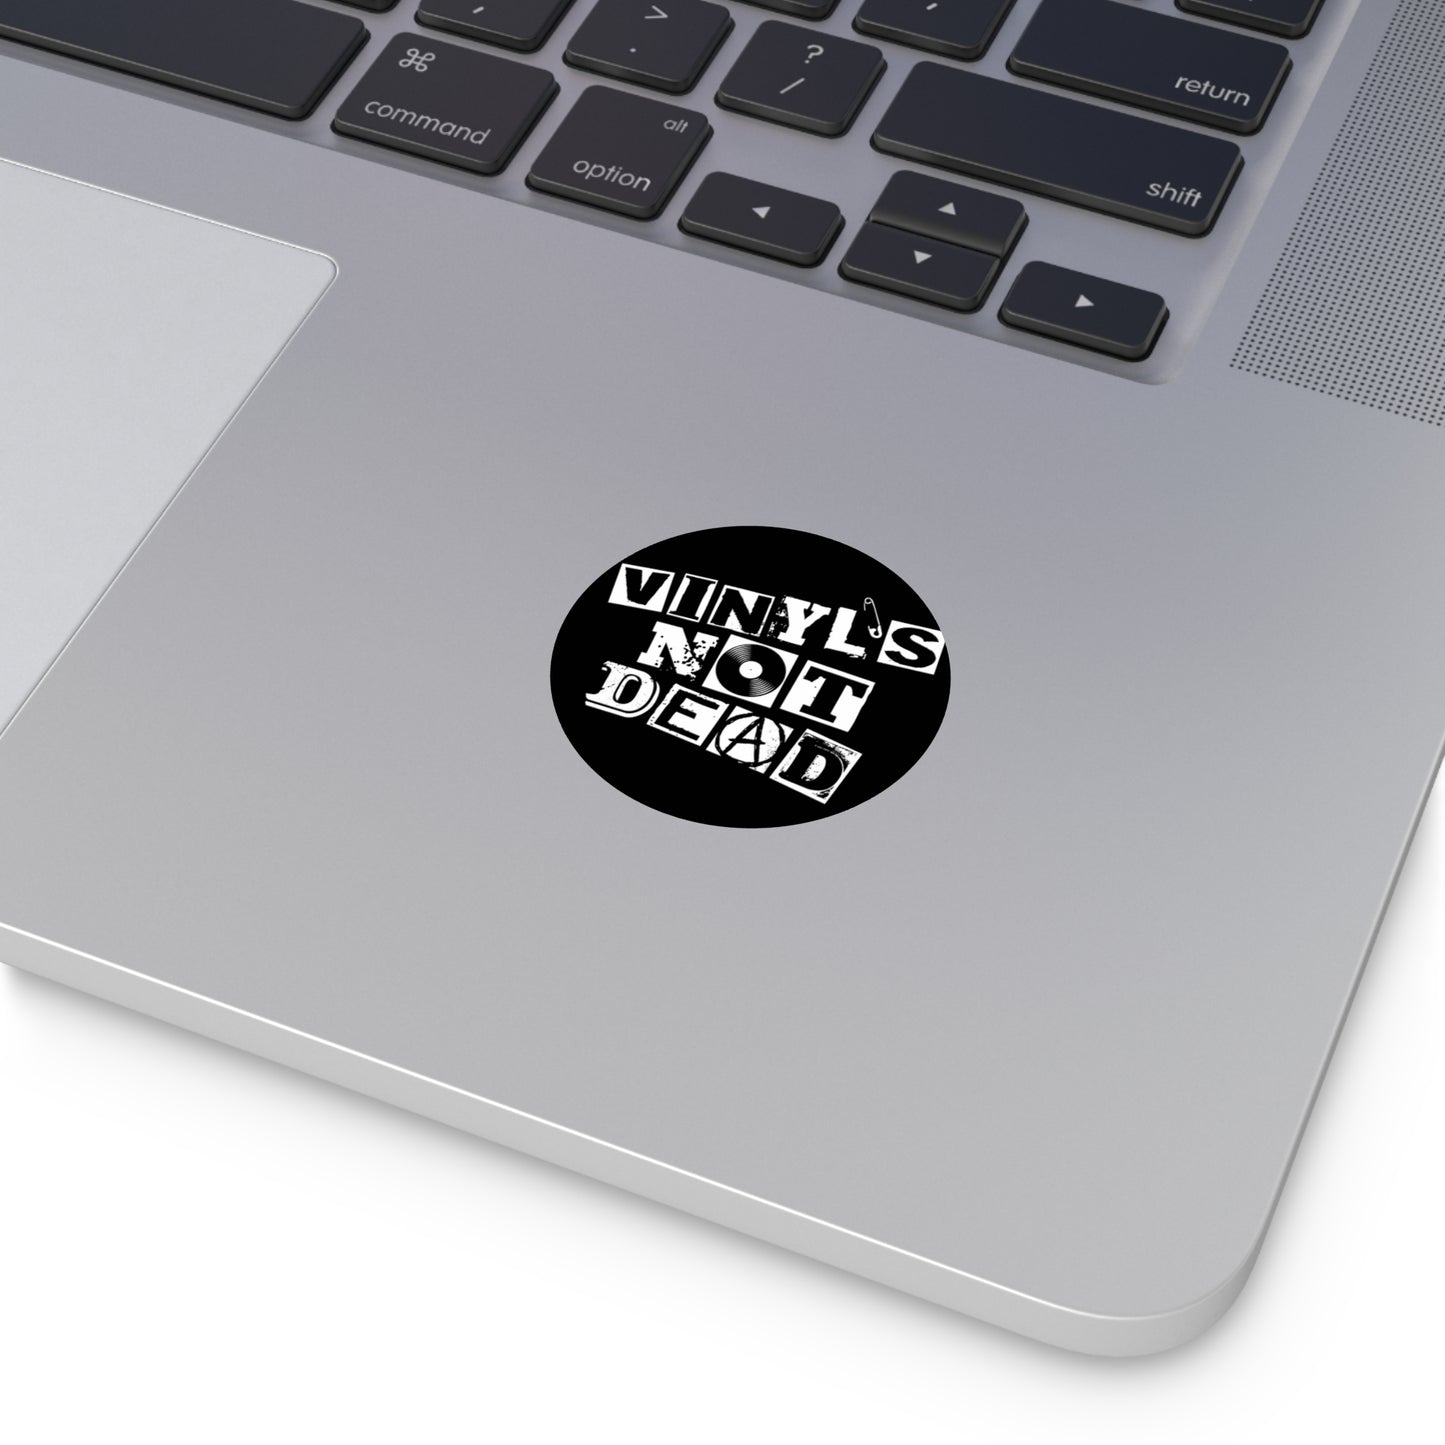 Vinyl Record Themed Round Vinyl Stickers - Vinyl is Not Dead - 5 sizes available